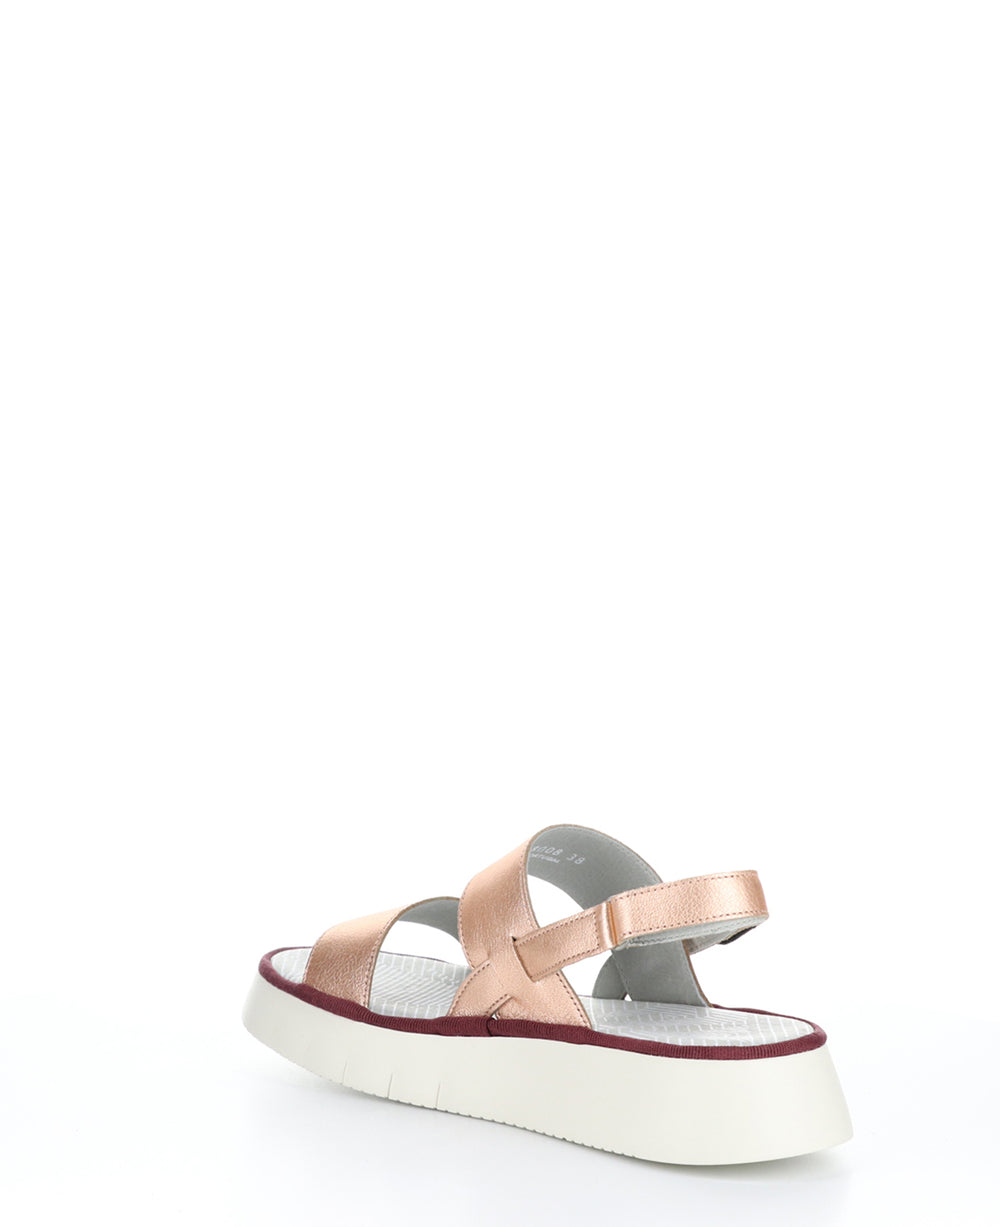 CURA318FLY BLUSH GOLD Wedge Sandals